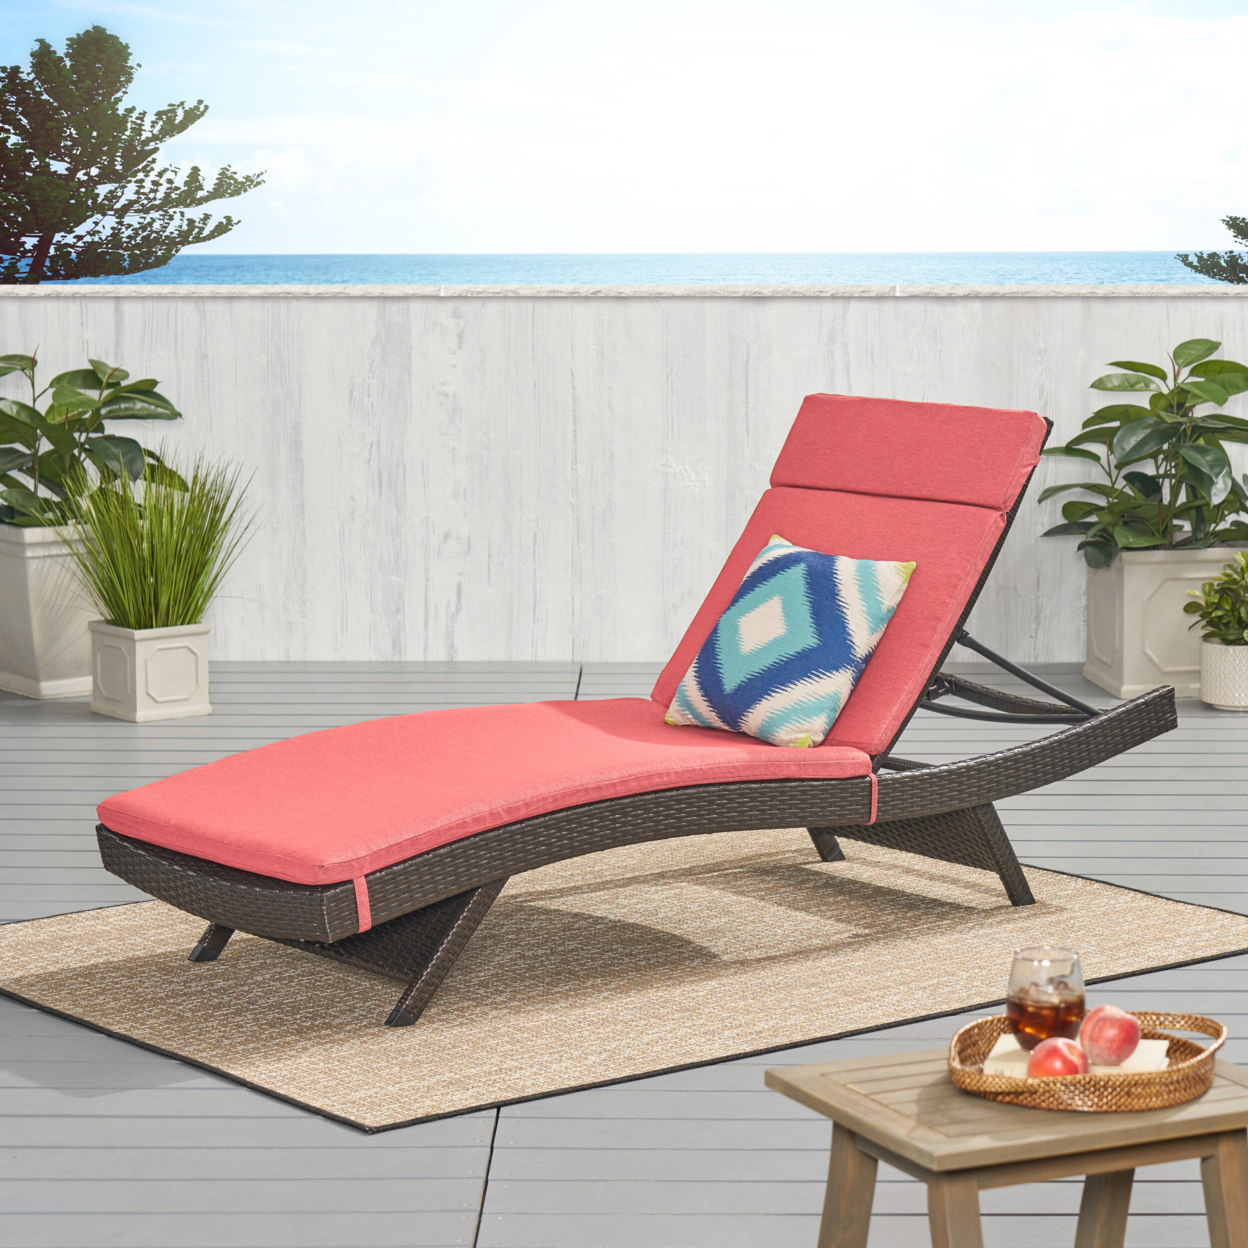 Lakeport Outdoor Adjustable Chaise Lounge Chair With Cushion - Red Cushion